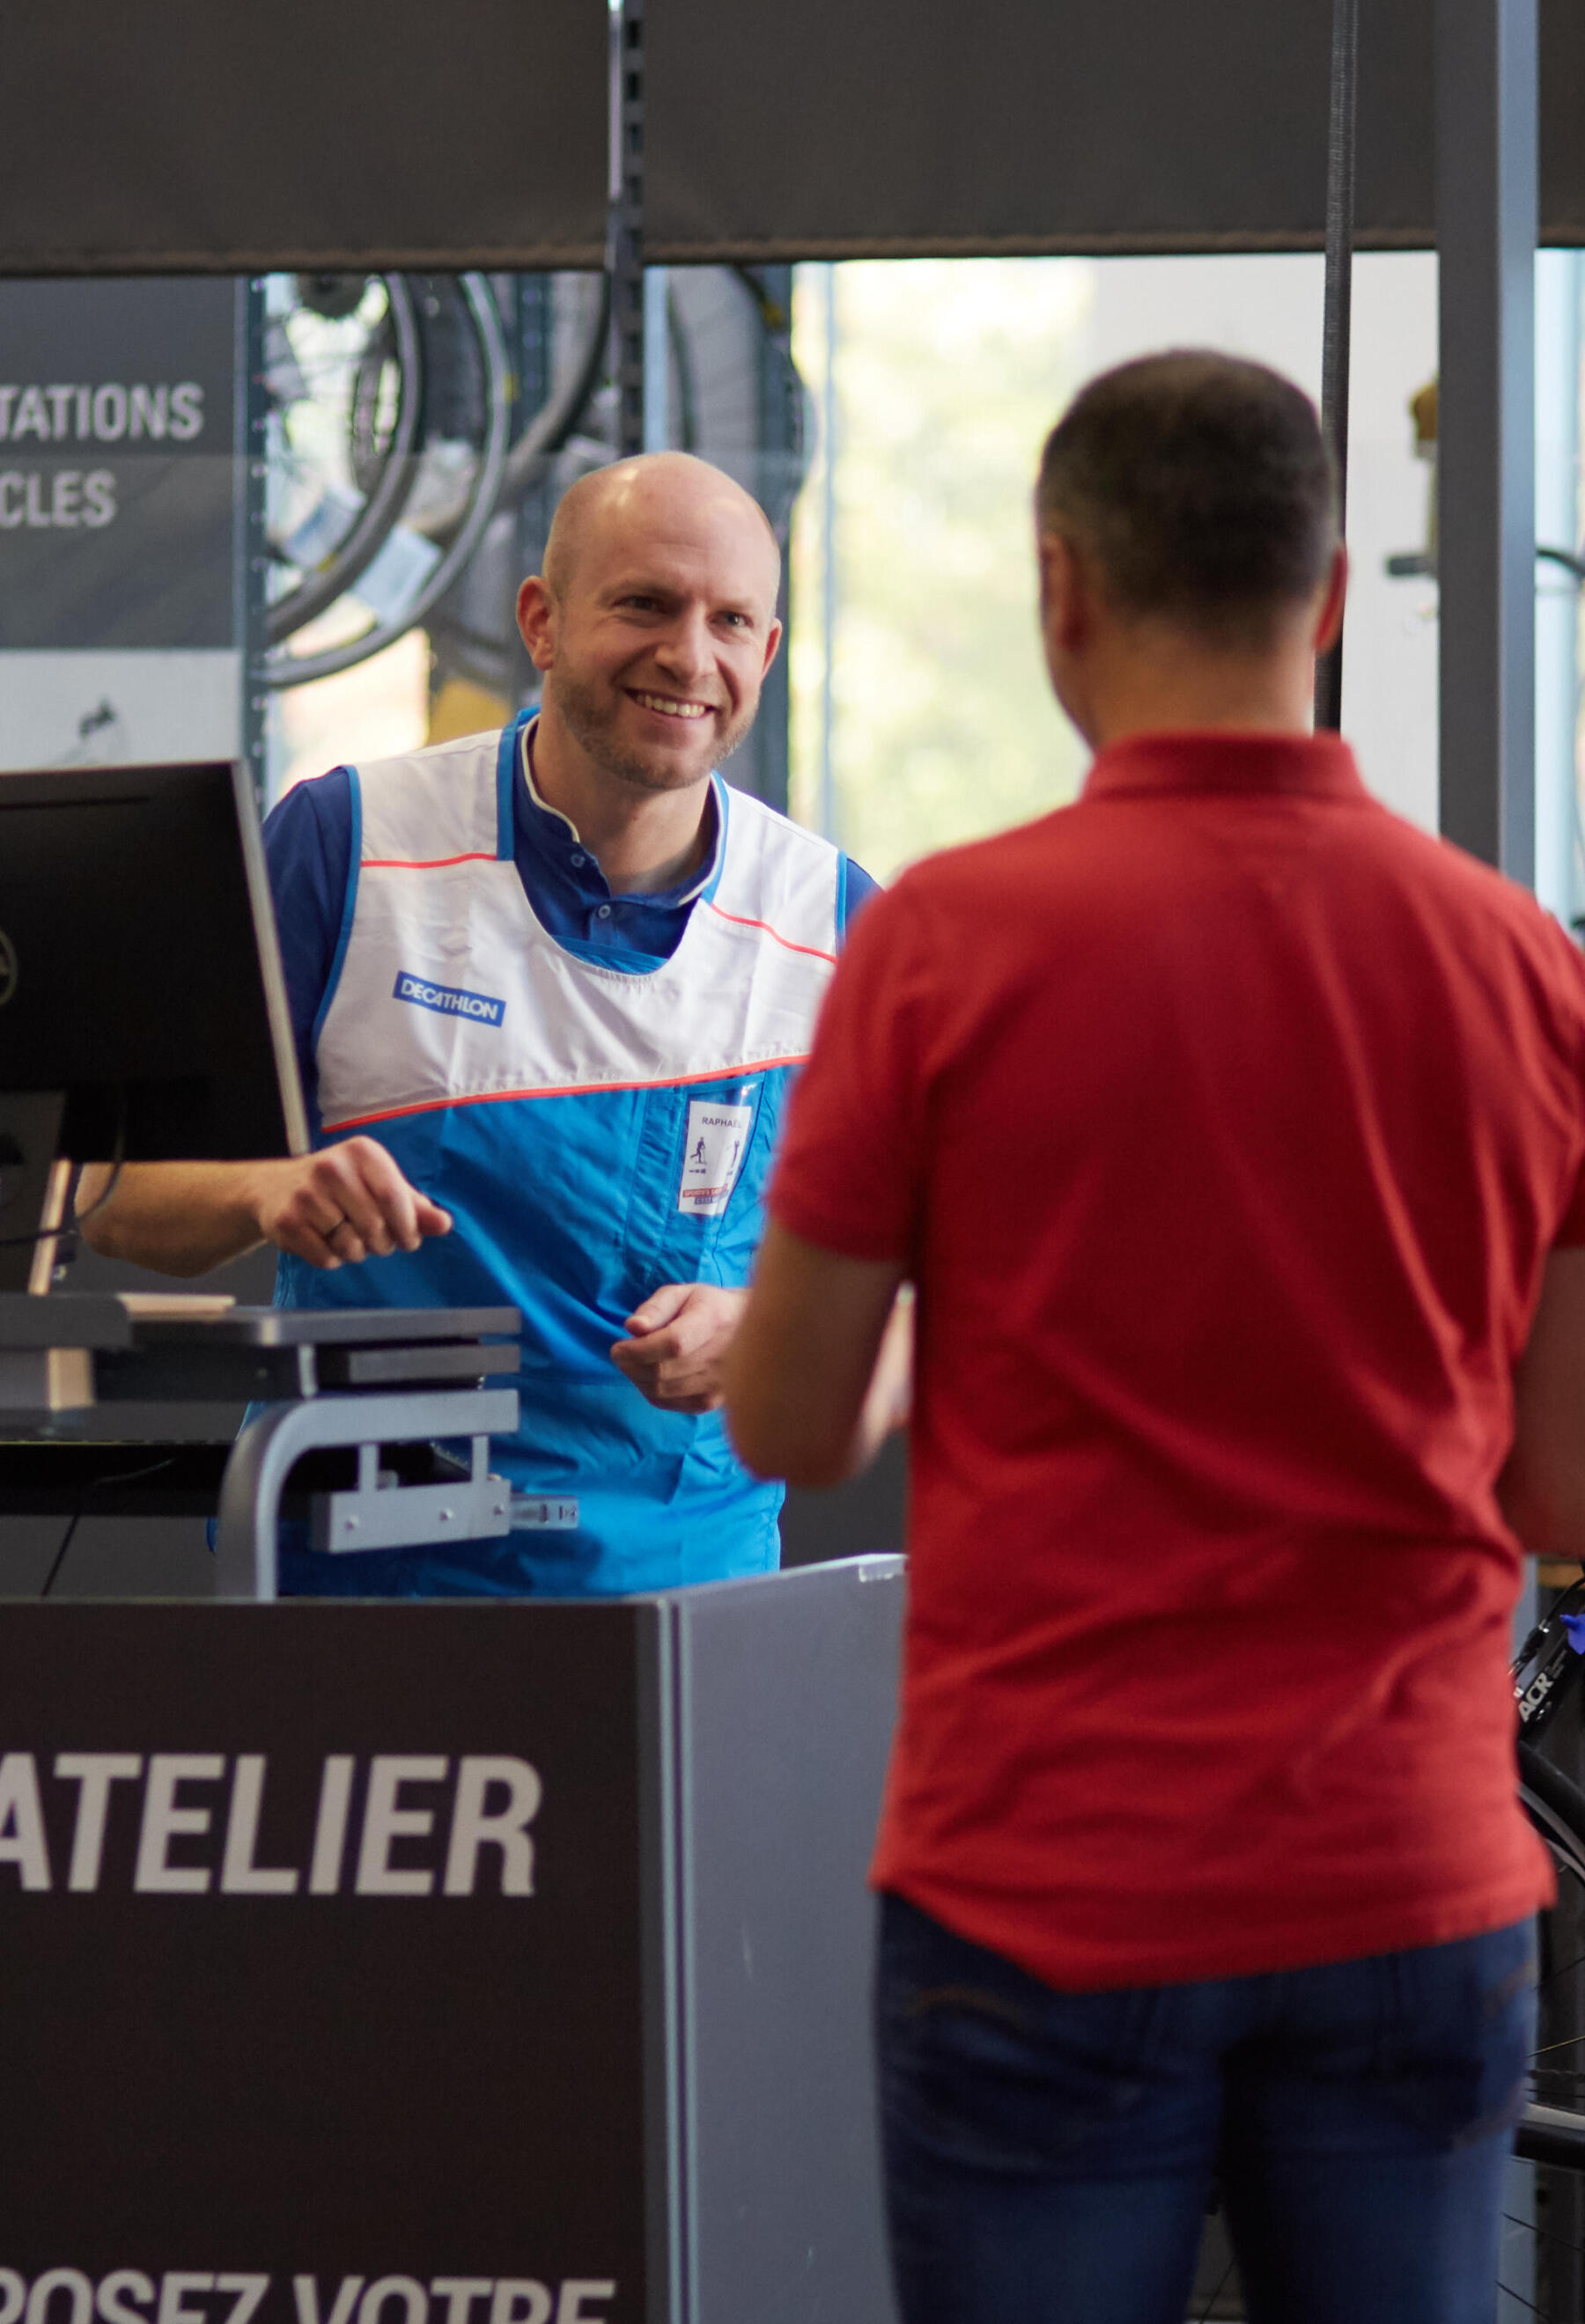 Decathlon Does Retail Right. Decathlon, the world's largest French